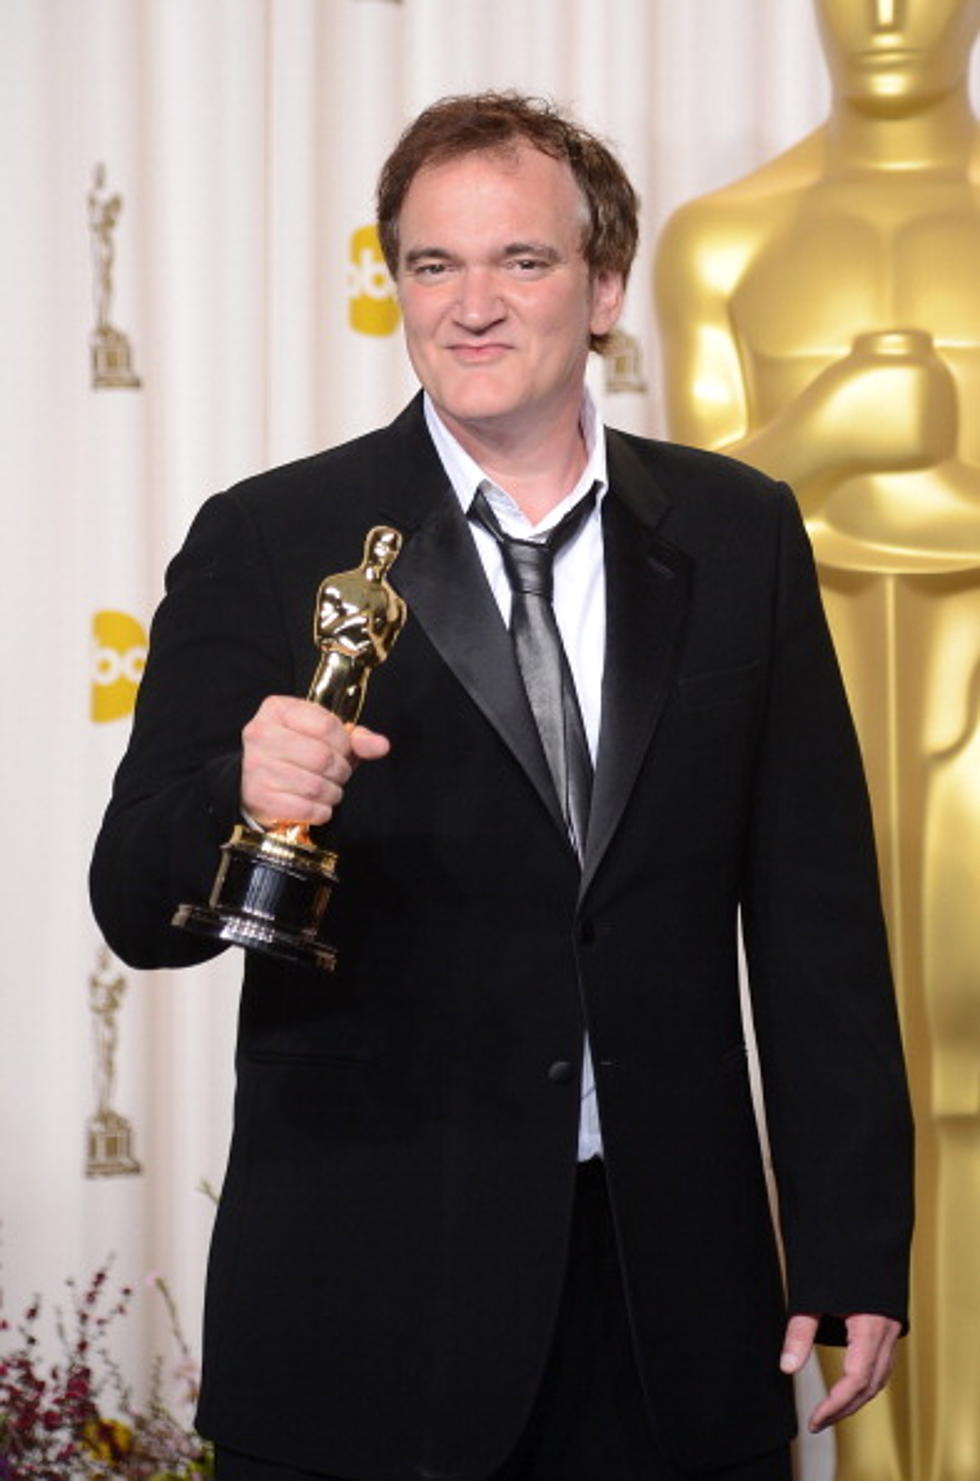 Next Year’s Oscar Winner May Have Wyoming Roots